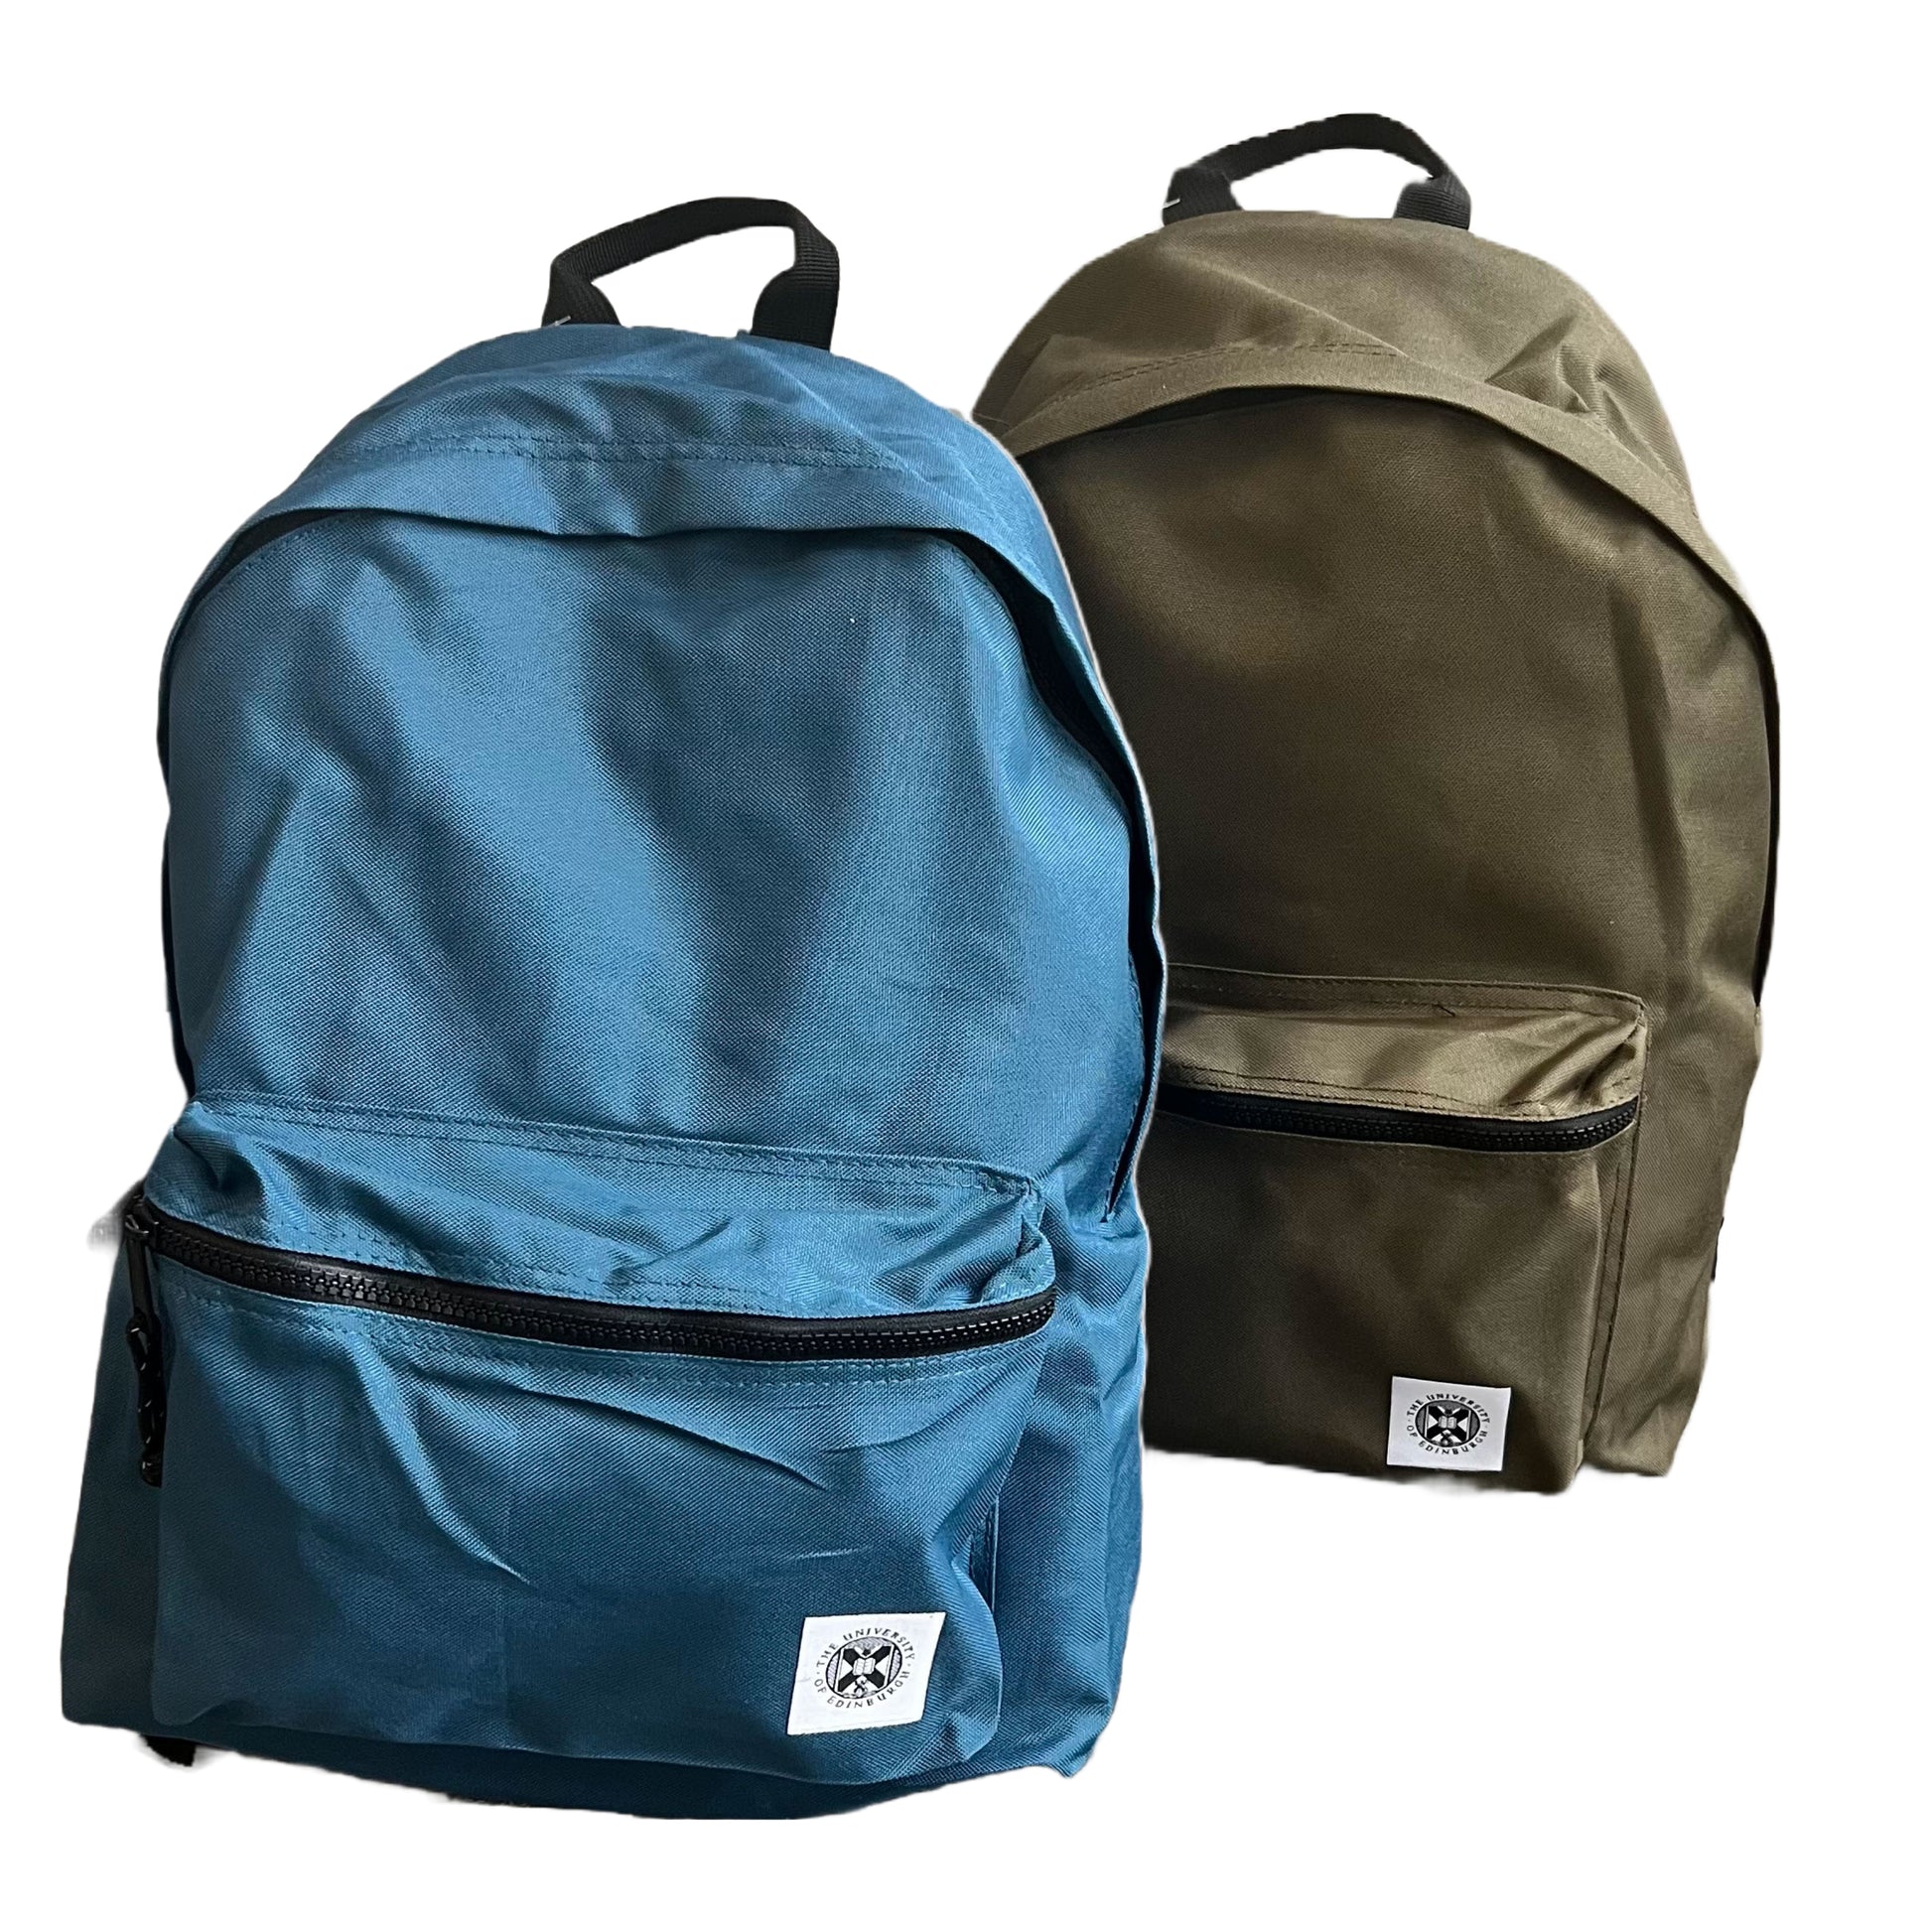 Two backpacks, one blue and one khaki green coloured. They have a front pocket with the University of Edinburgh's crest stitched onto it. They are made of recycled materials.